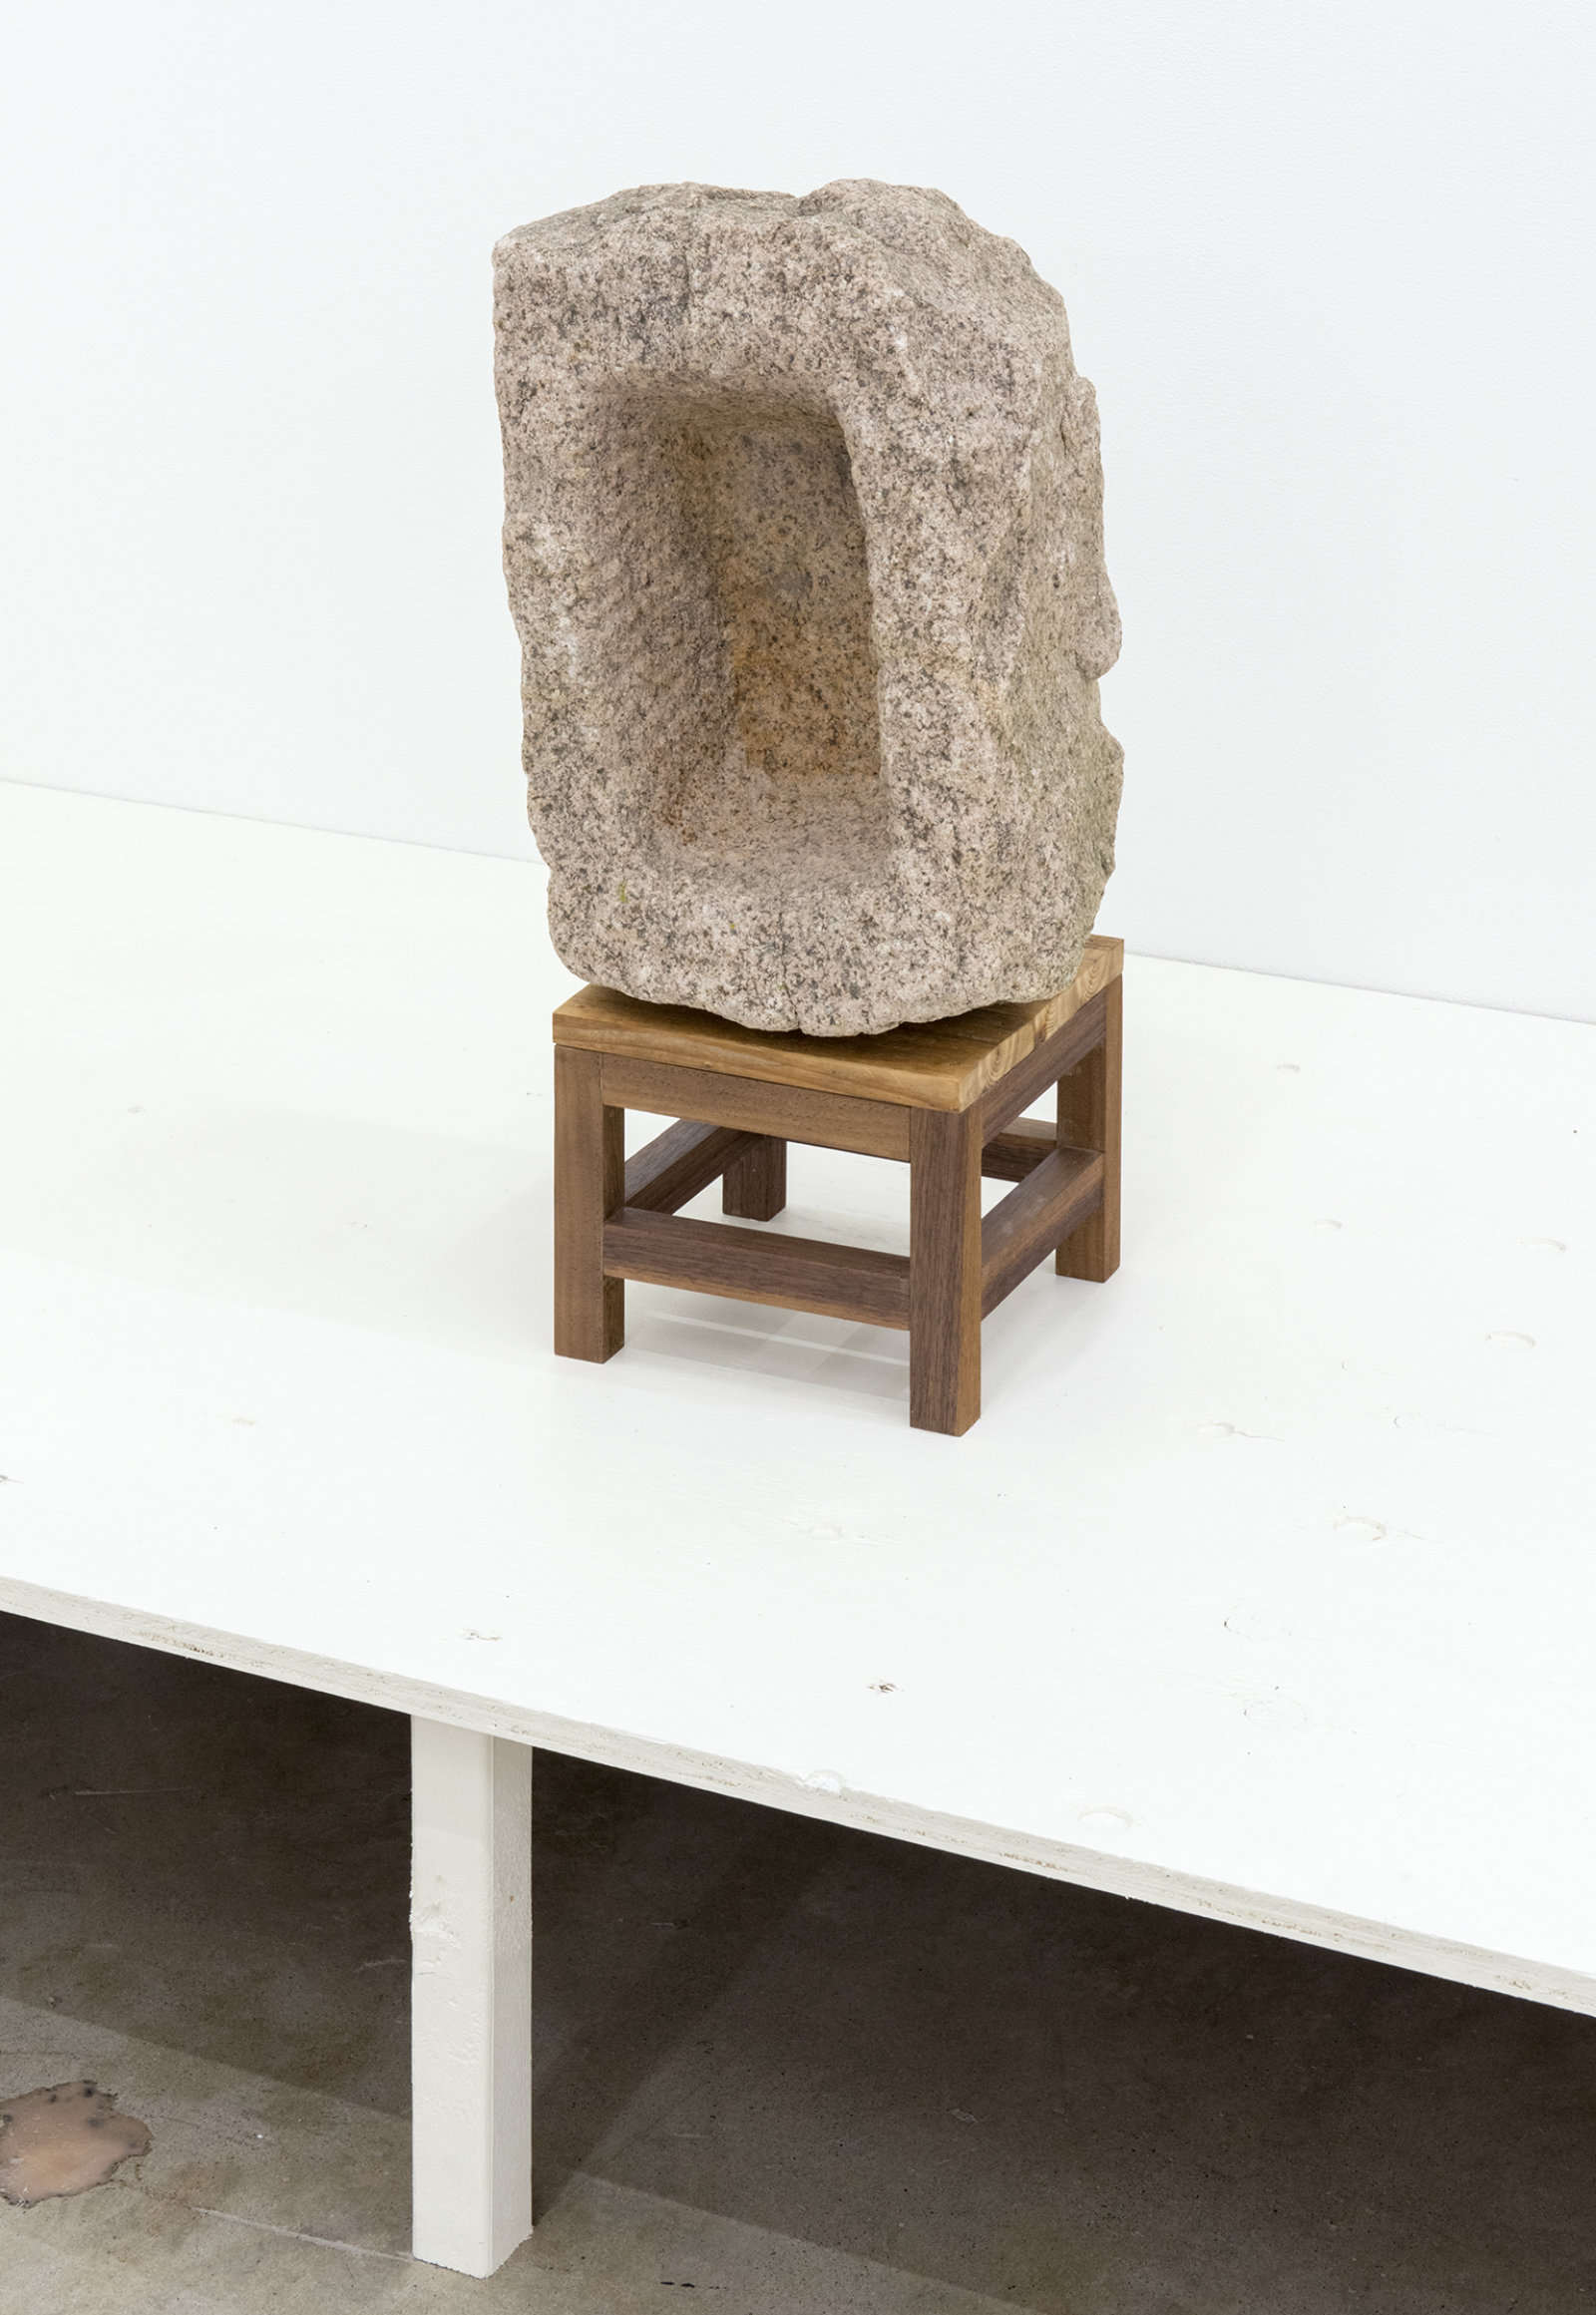 Ashes Withyman, Antique Stone 03, 2013, hand carved antique granite, wood, 21 x 11 x 8 in. (53 x 27 x 20 cm)